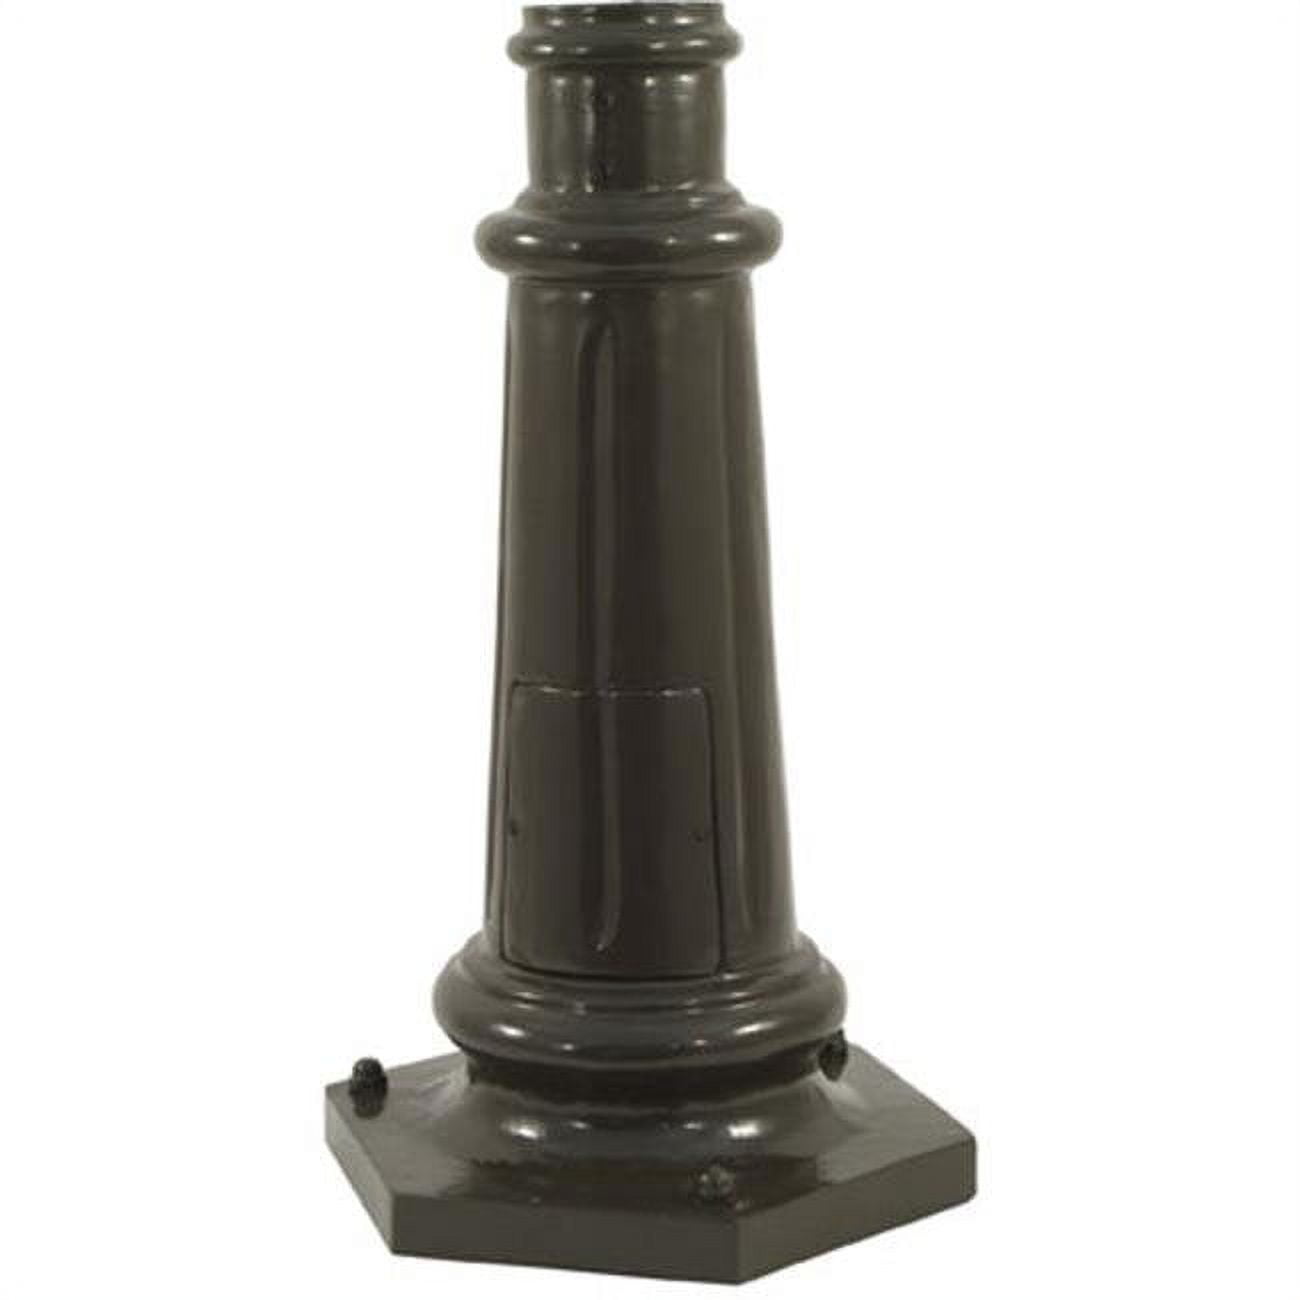 Bs350-bz Surface Mounted Base For 3 In. Outer Dia Round Post, Bronze - 21.25 X 12.25 X 12.25 In.